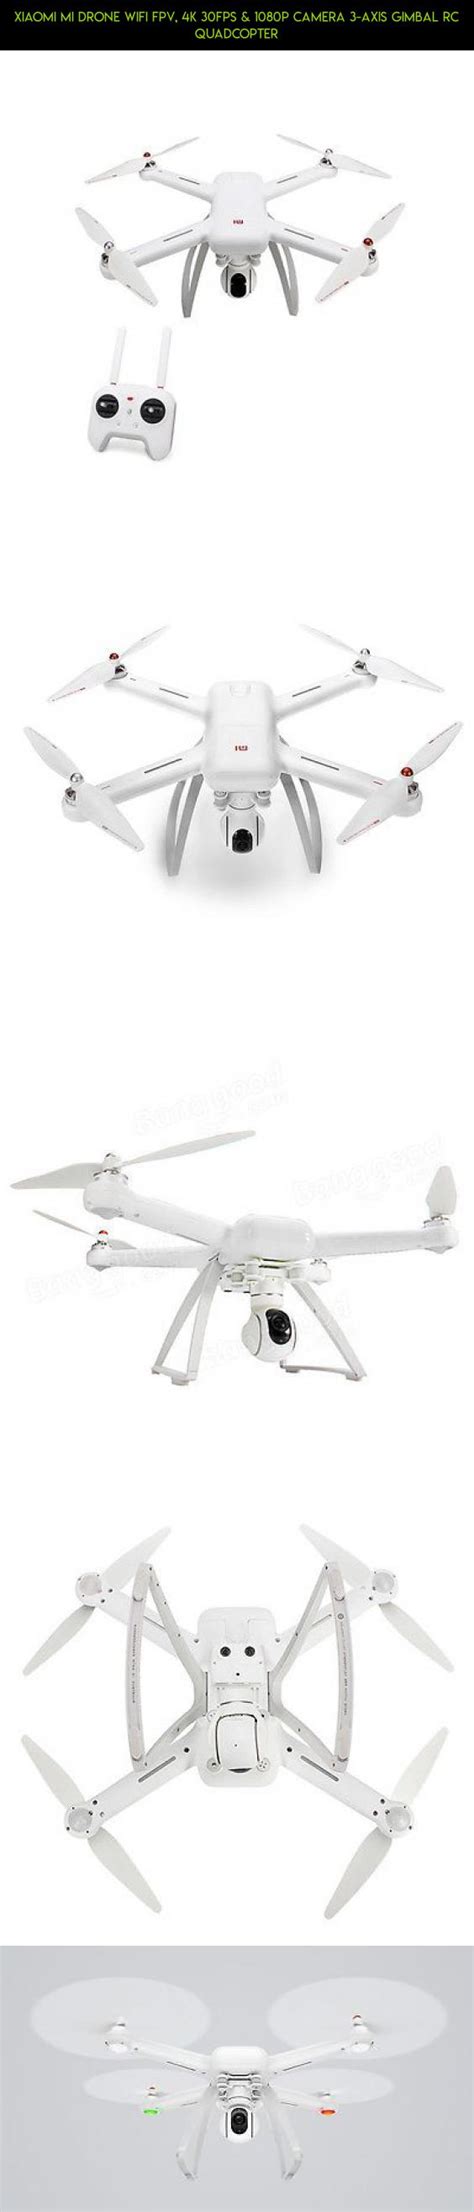 xiaomi mi drone wifi fpv  fps p camera  axis gimbal rc quadcopter technology drone